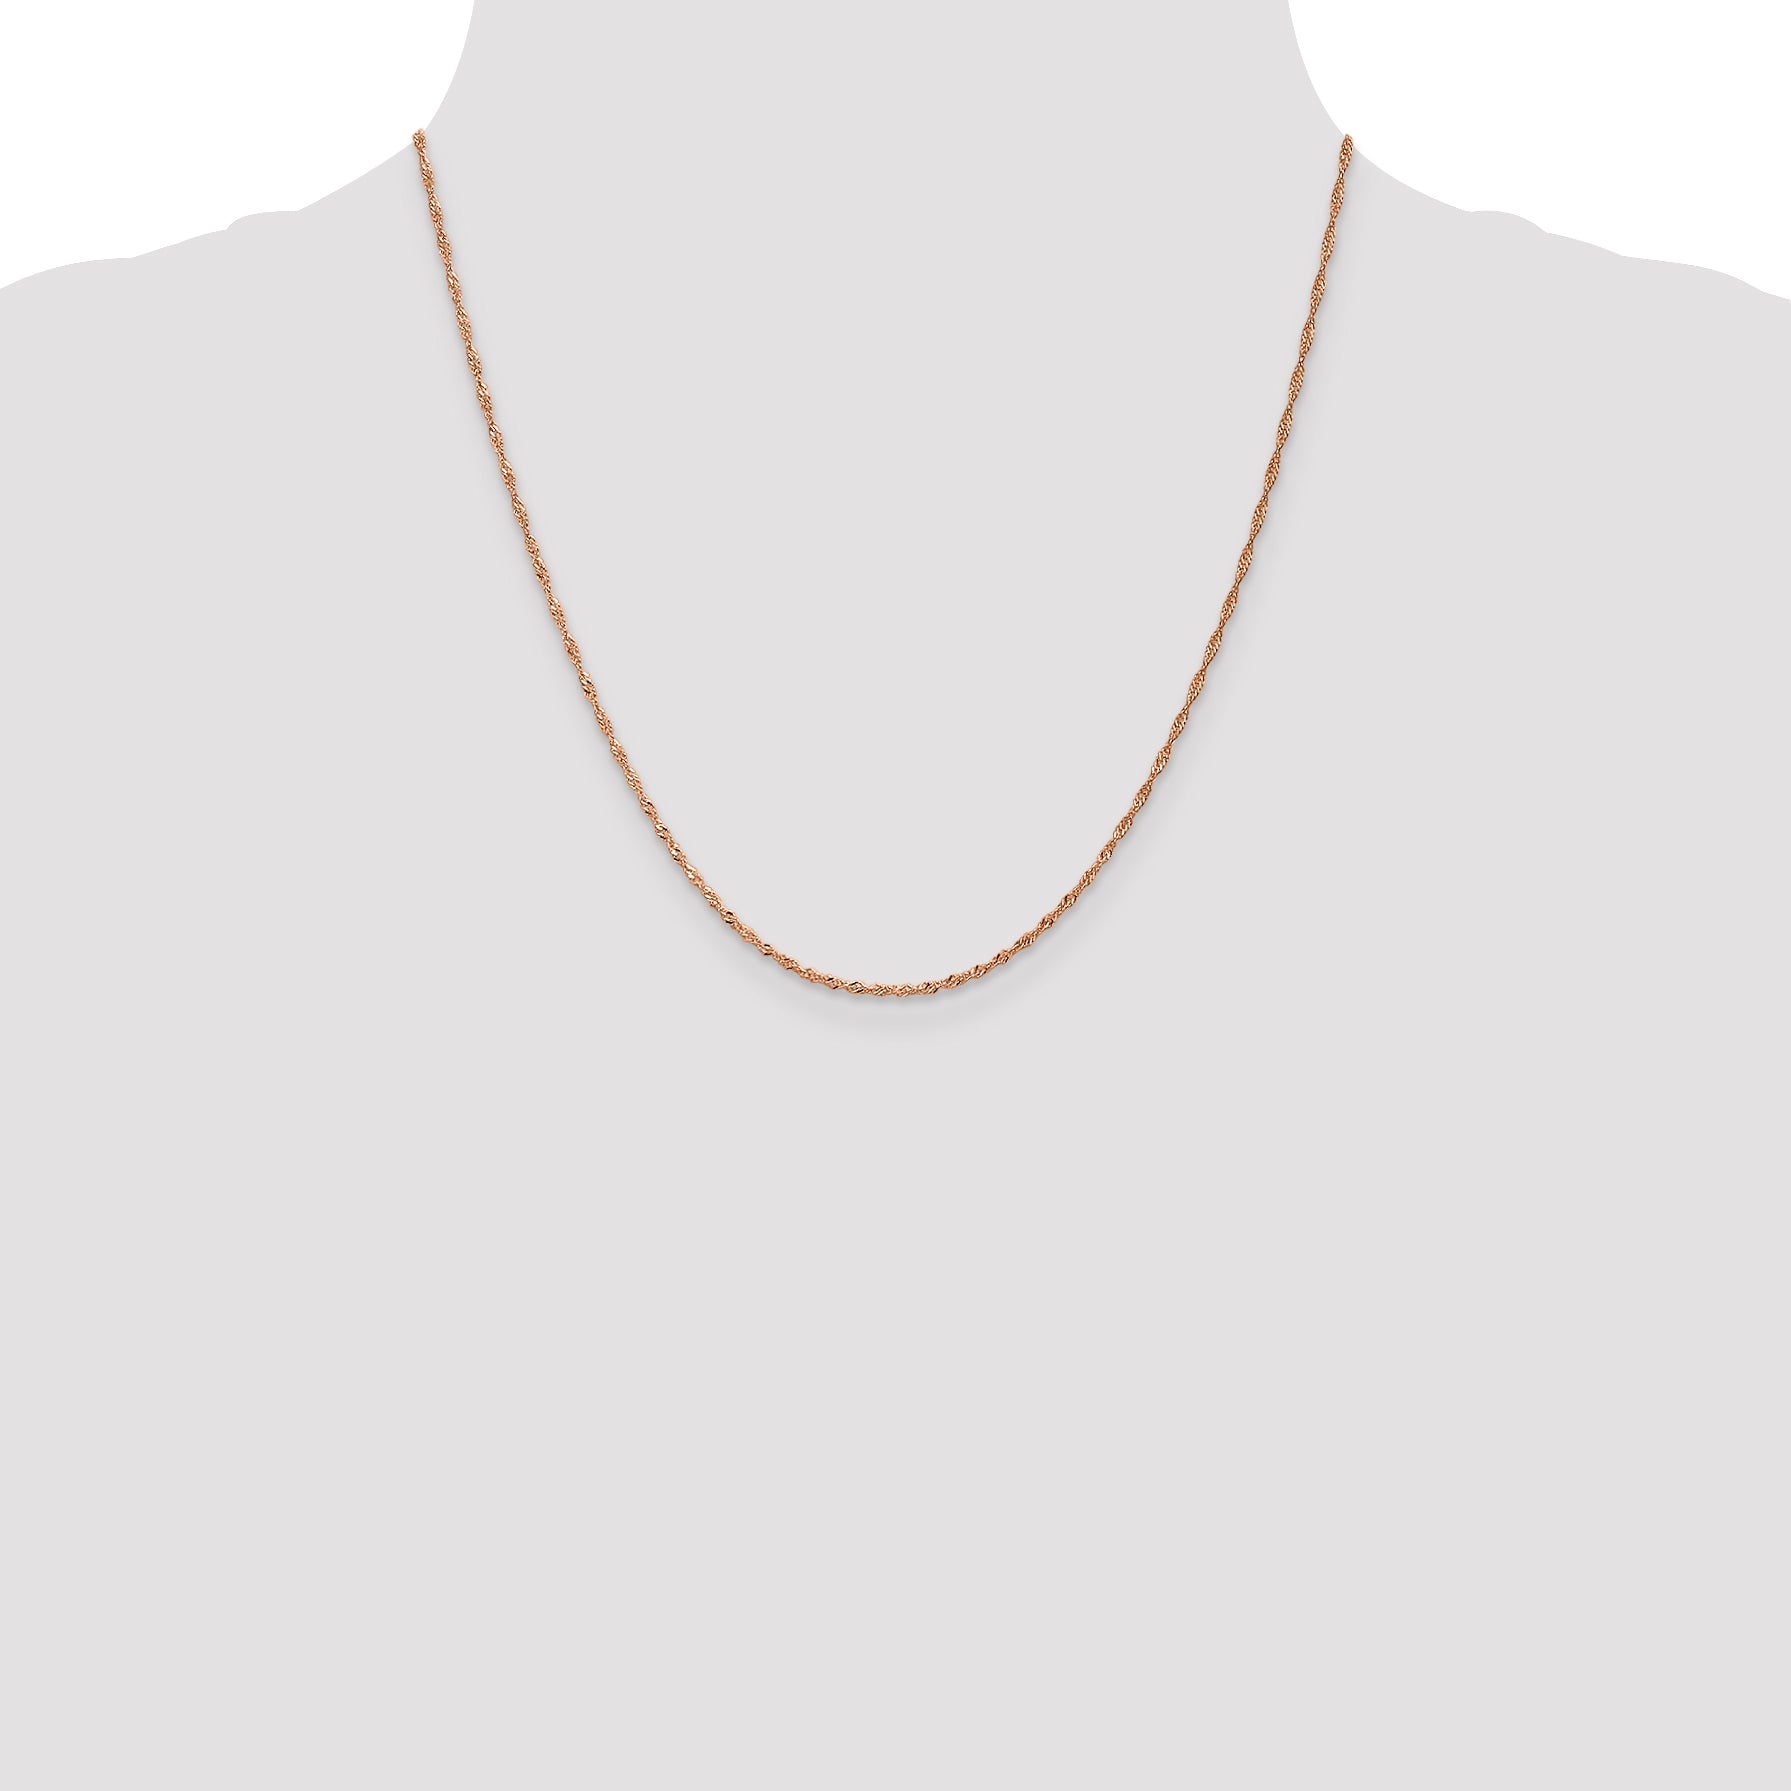 14K Rose Gold 1mm Singapore with Lobster Clasp Chain